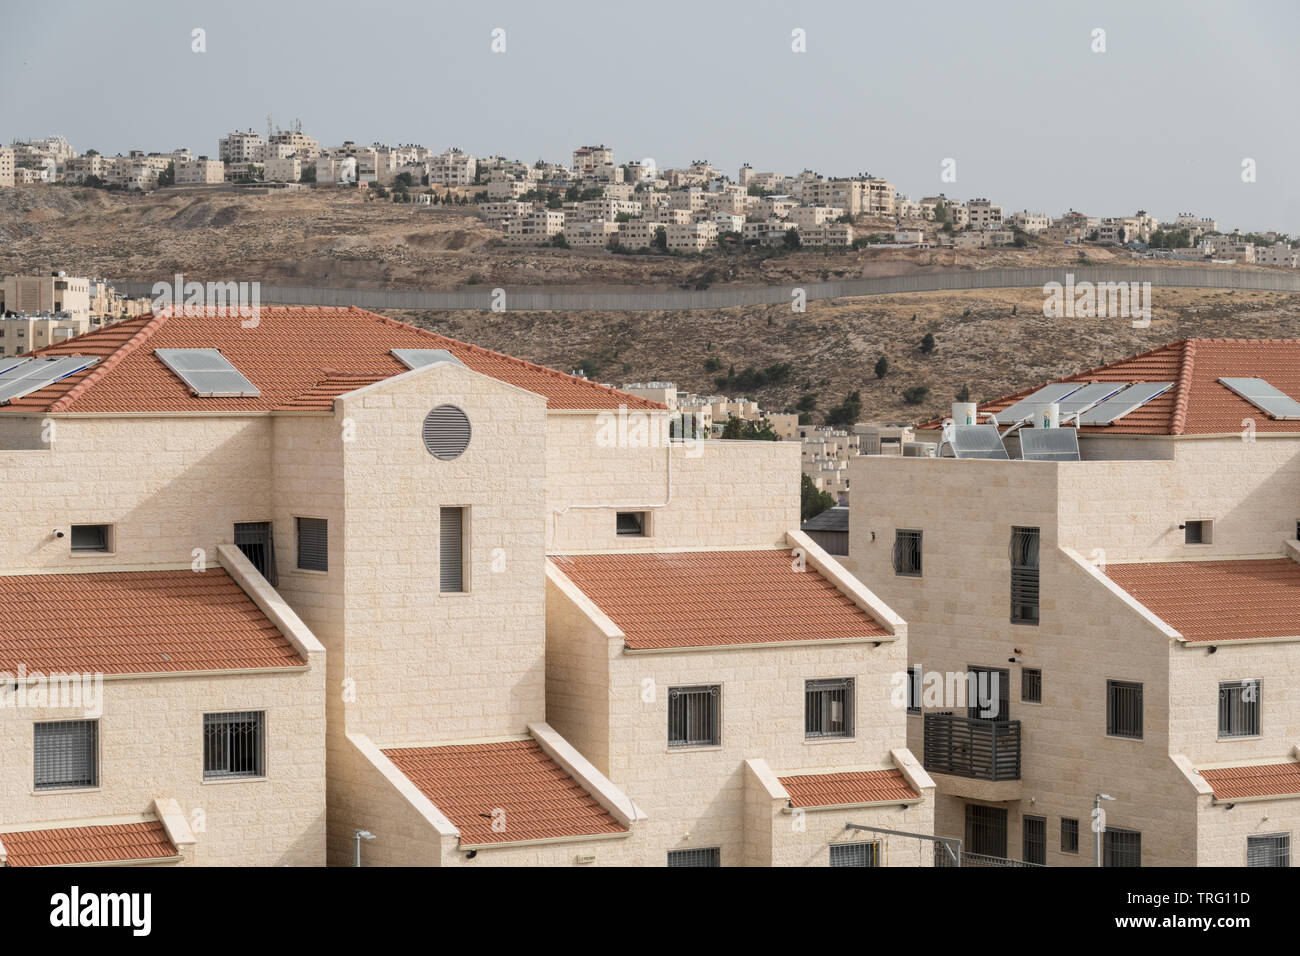 Jerusalem, Israel. 5th June, 2019. A northward view in Jerusalem's Pisgat Zeev neighborhood depicts recently constructed red roofed homes in the foreground with Israel's security barrier in mid ground and the outskirts of Palestinian Qalandiya and Jaba beyond. Israel's Housing Ministry recently published tenders for the construction of 805 new housing units in the Ramot and Pisgat Zeev neighborhoods drawing EU condemnation (1st June, 2019) stating “The European Union is strongly opposed to Israel's settlement policy, including in East Jerusalem, which is illegal under international law and an Stock Photo